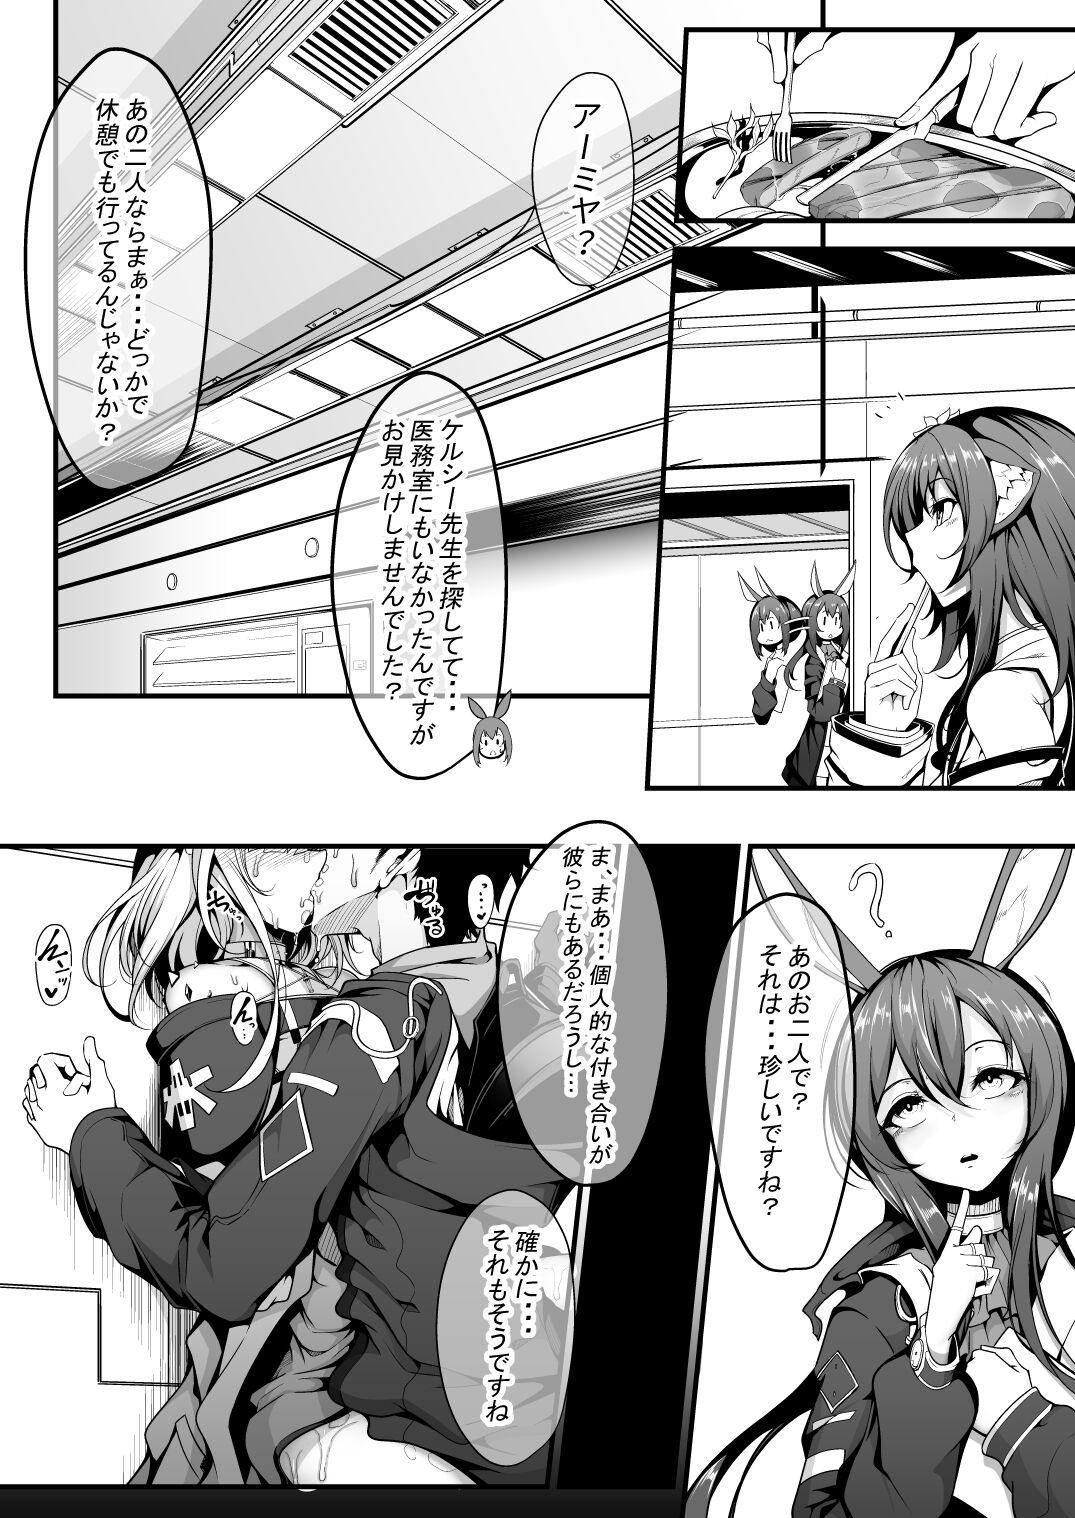 Flash M.P. Vol. 22 - Arknights Leche - Page 3